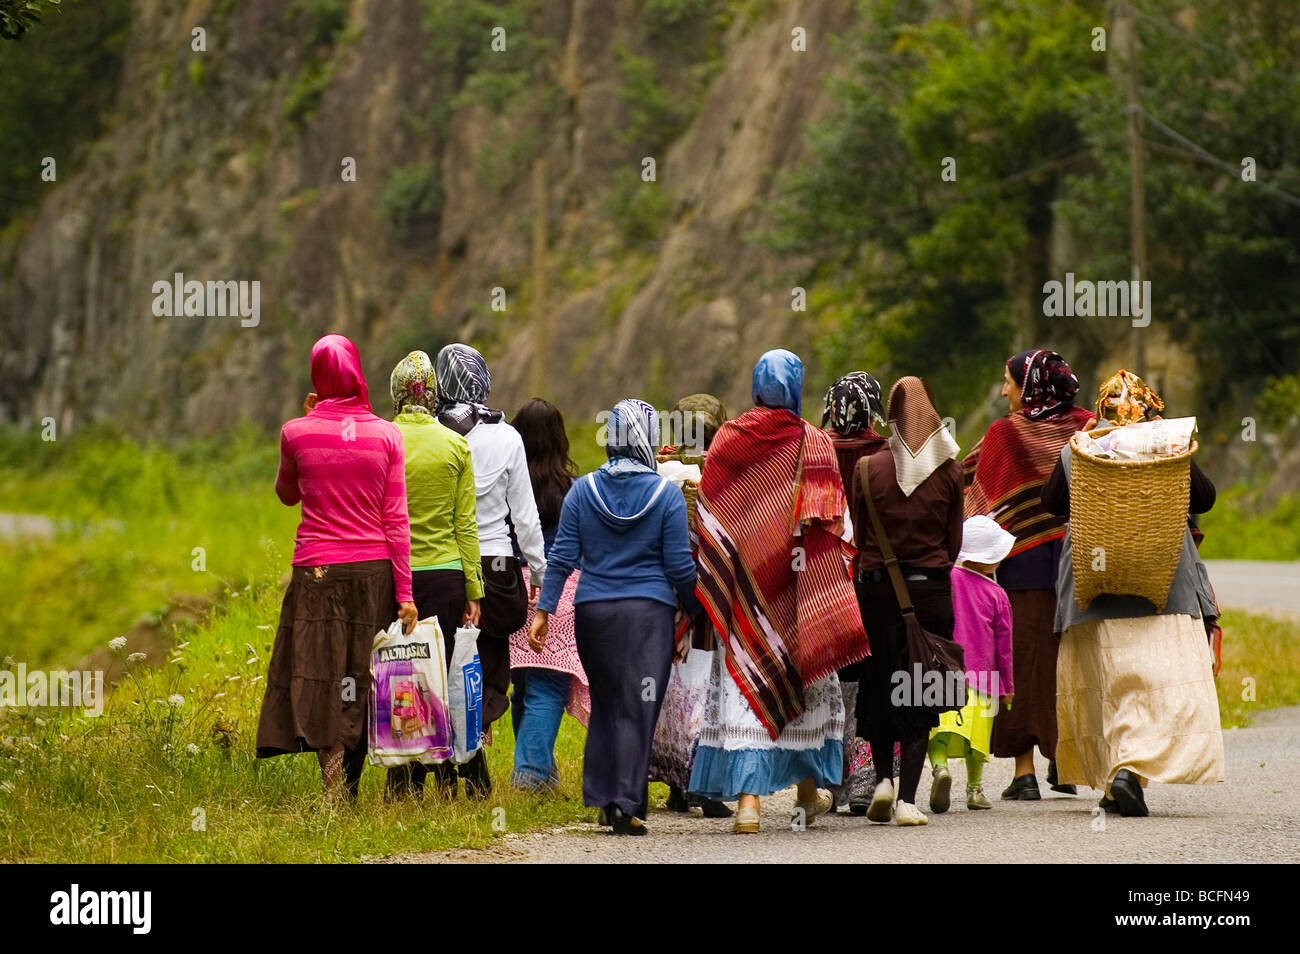 July 2007 north east Turkey Groupe of Turkish women walking to the village Stock Photo